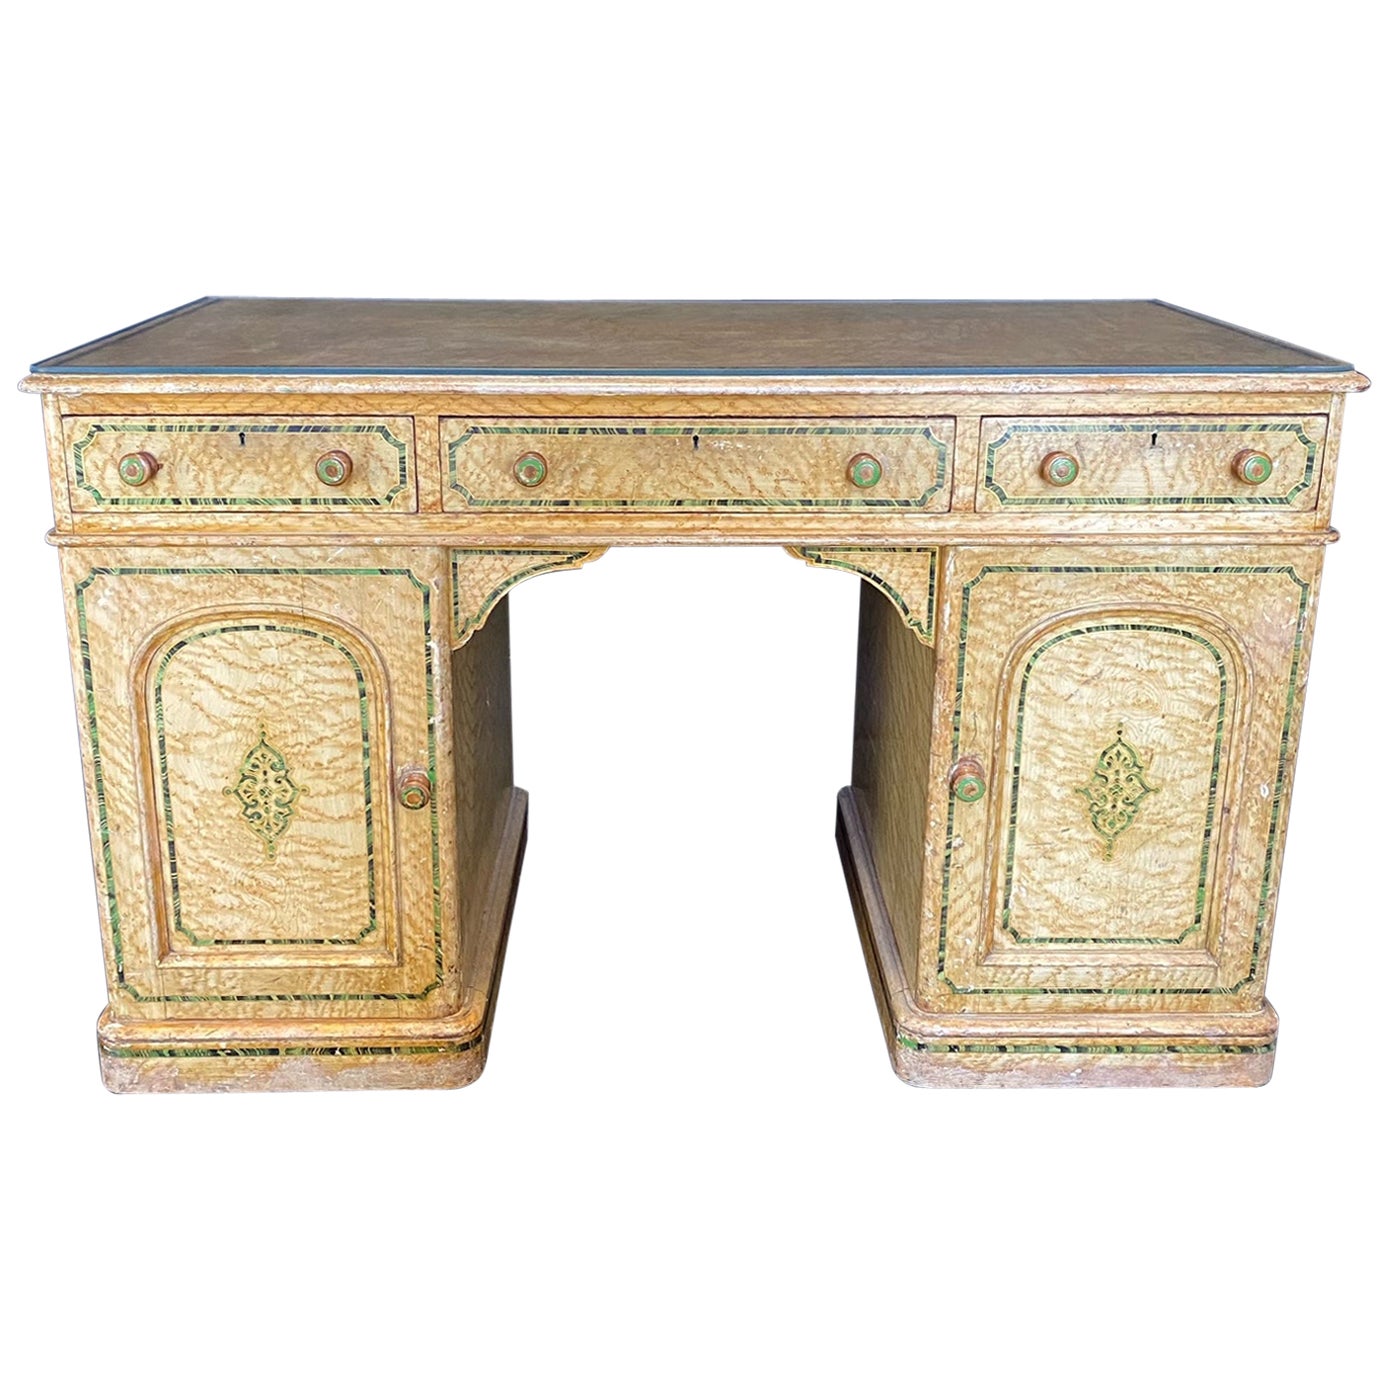 Magnificent English 19th Century Faux Painted Marbleized Pedestal Writing Desk For Sale